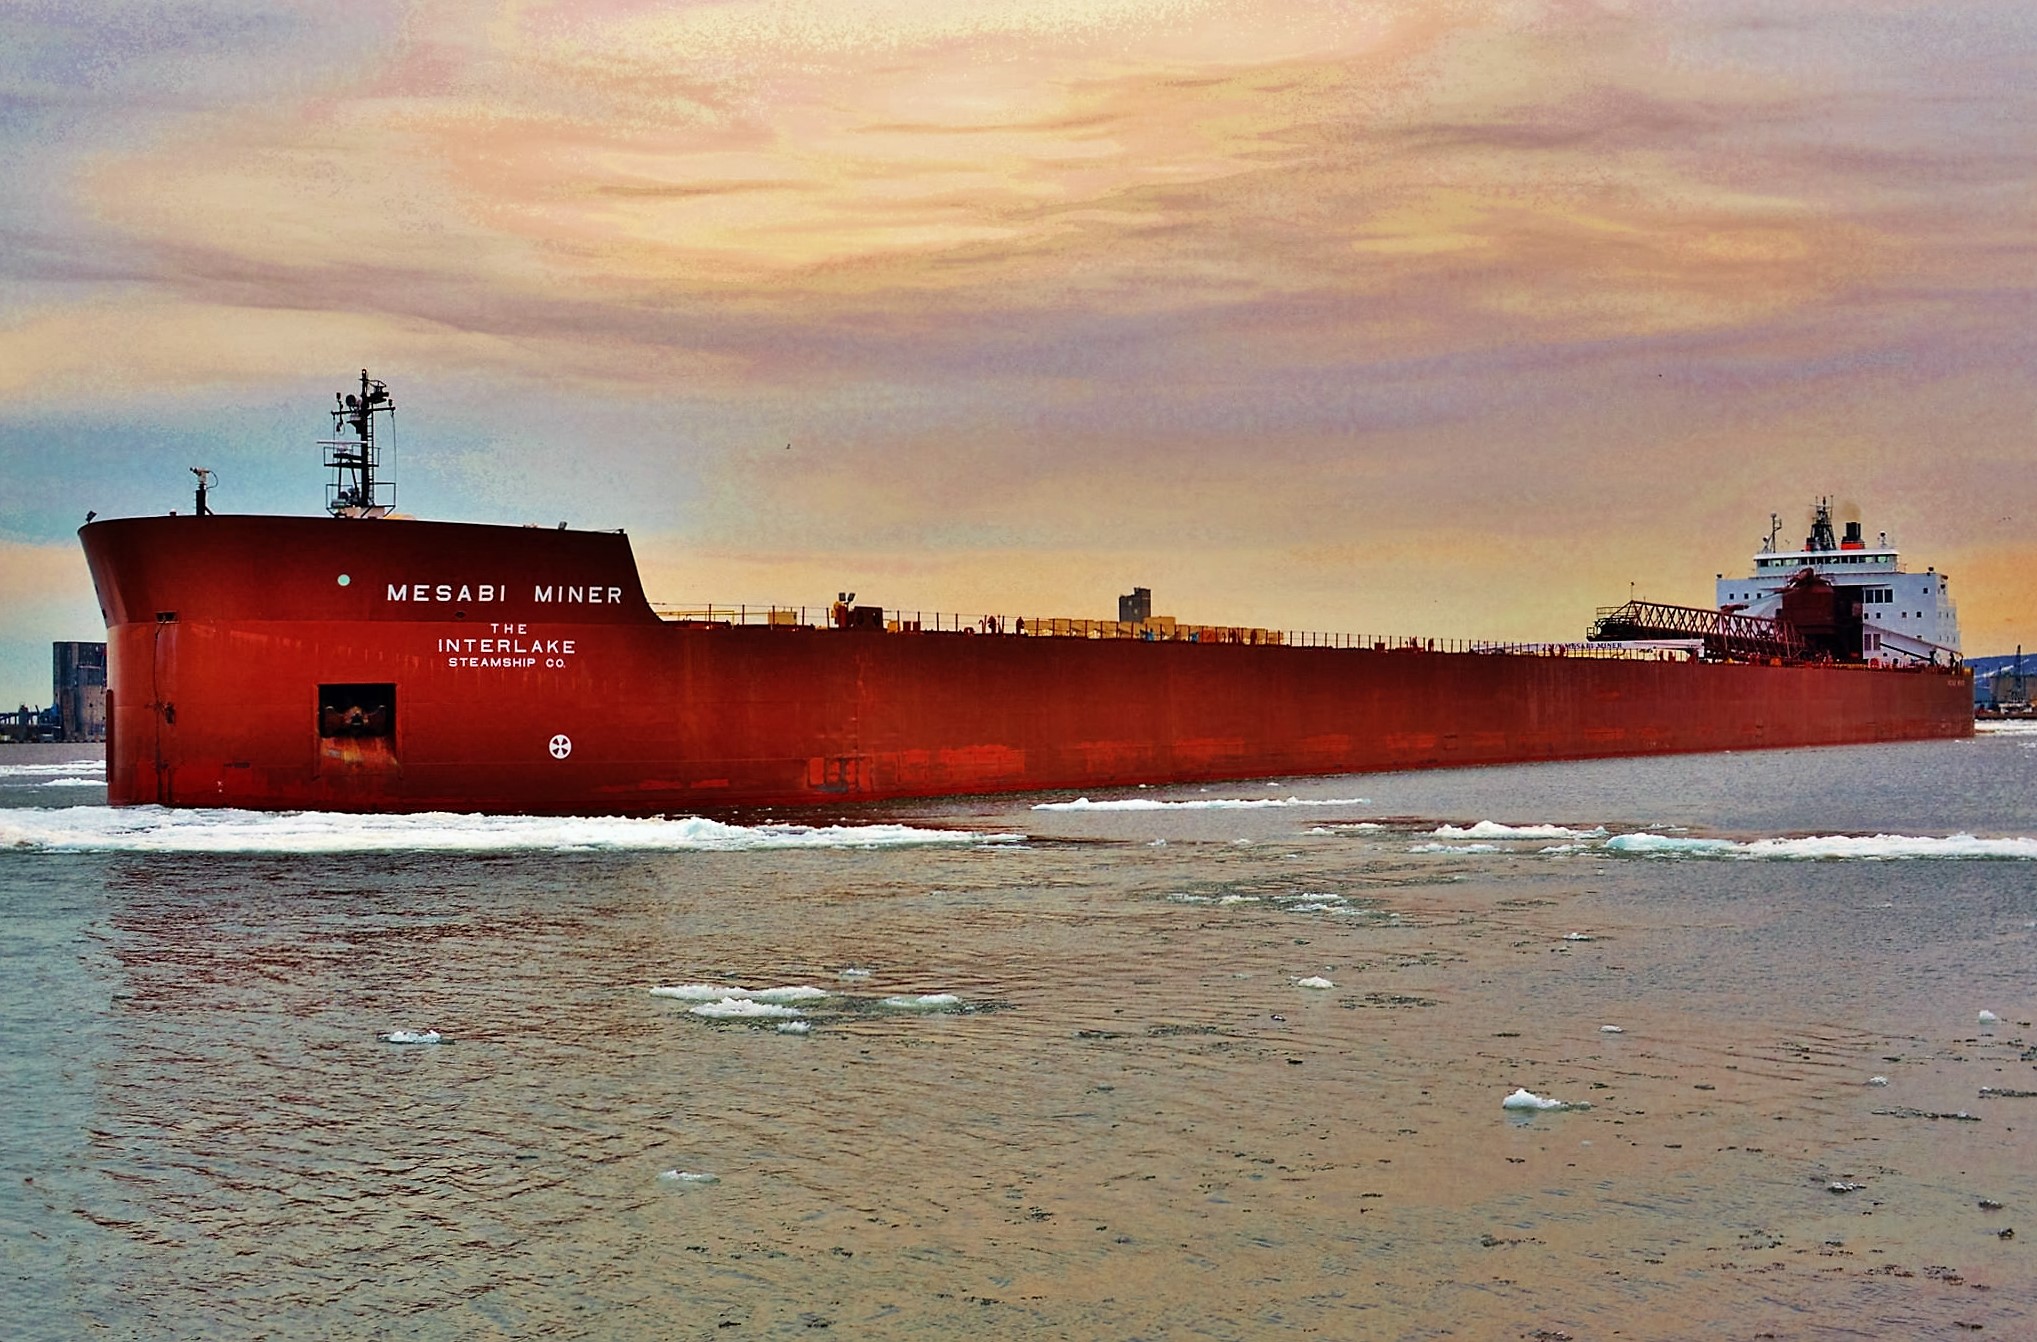 Mesabi Miner is a "super carrier," one of thirteen 1,000-footers. (Photo by Frank Frisk)